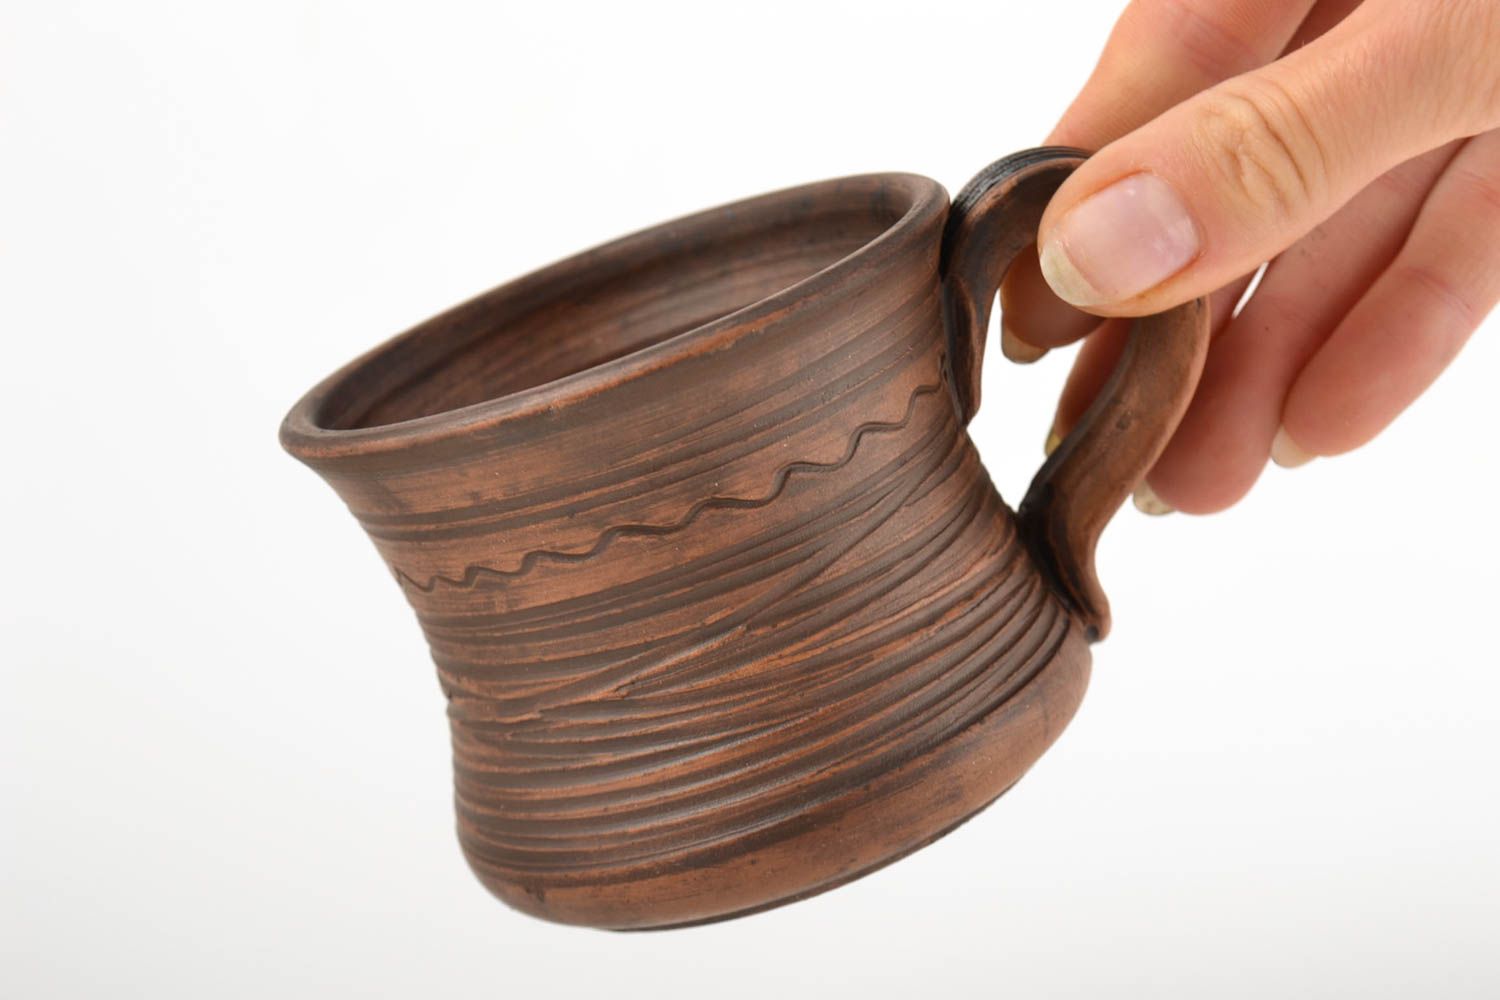 5 oz ceramic cup handmade with handle and village-style pattern 0,35 lb photo 2